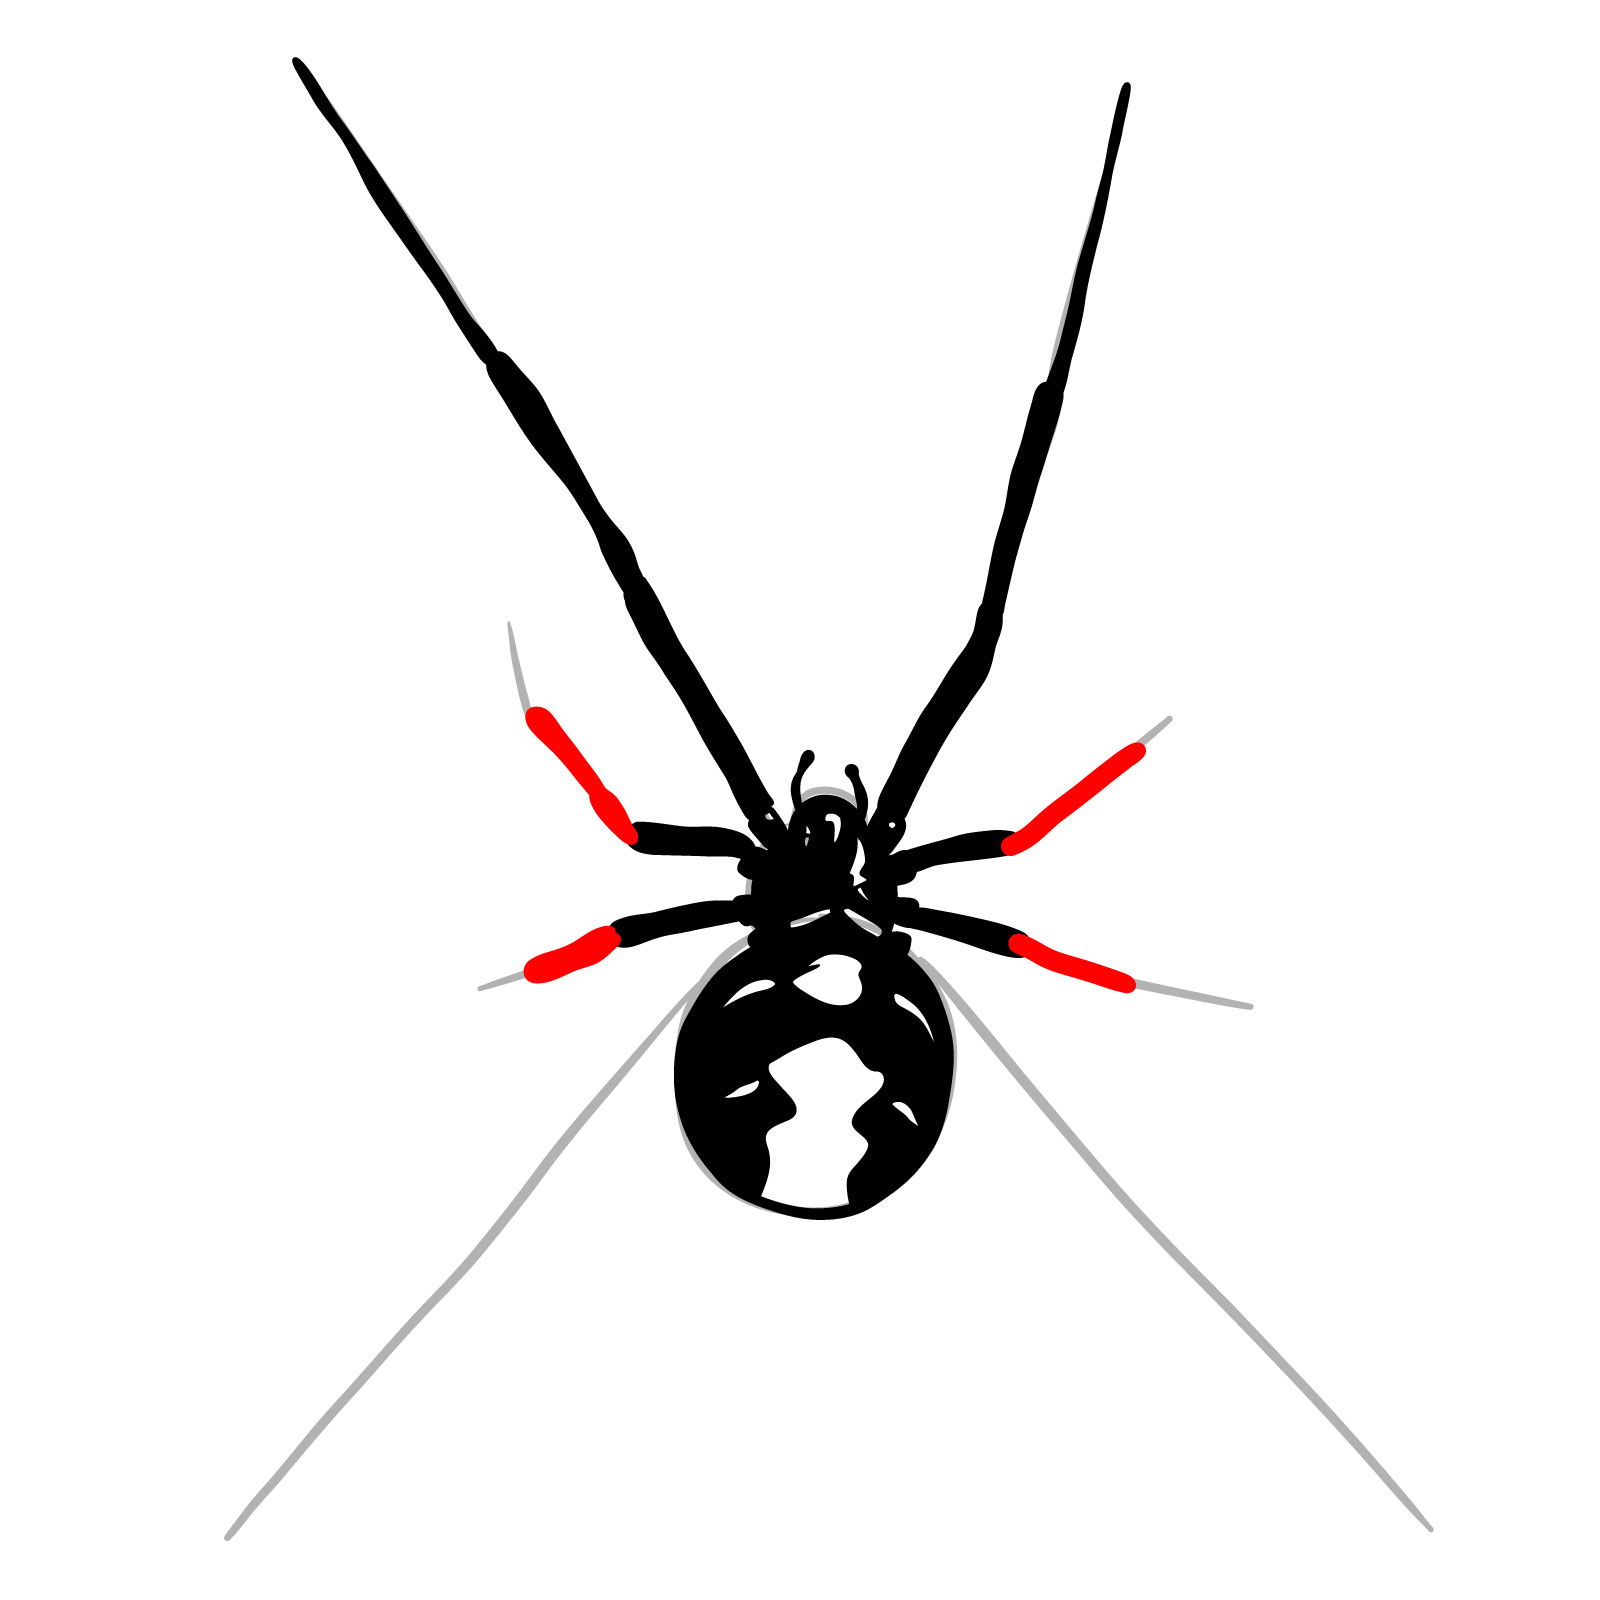 How to draw a Black Widow Spider - step 15